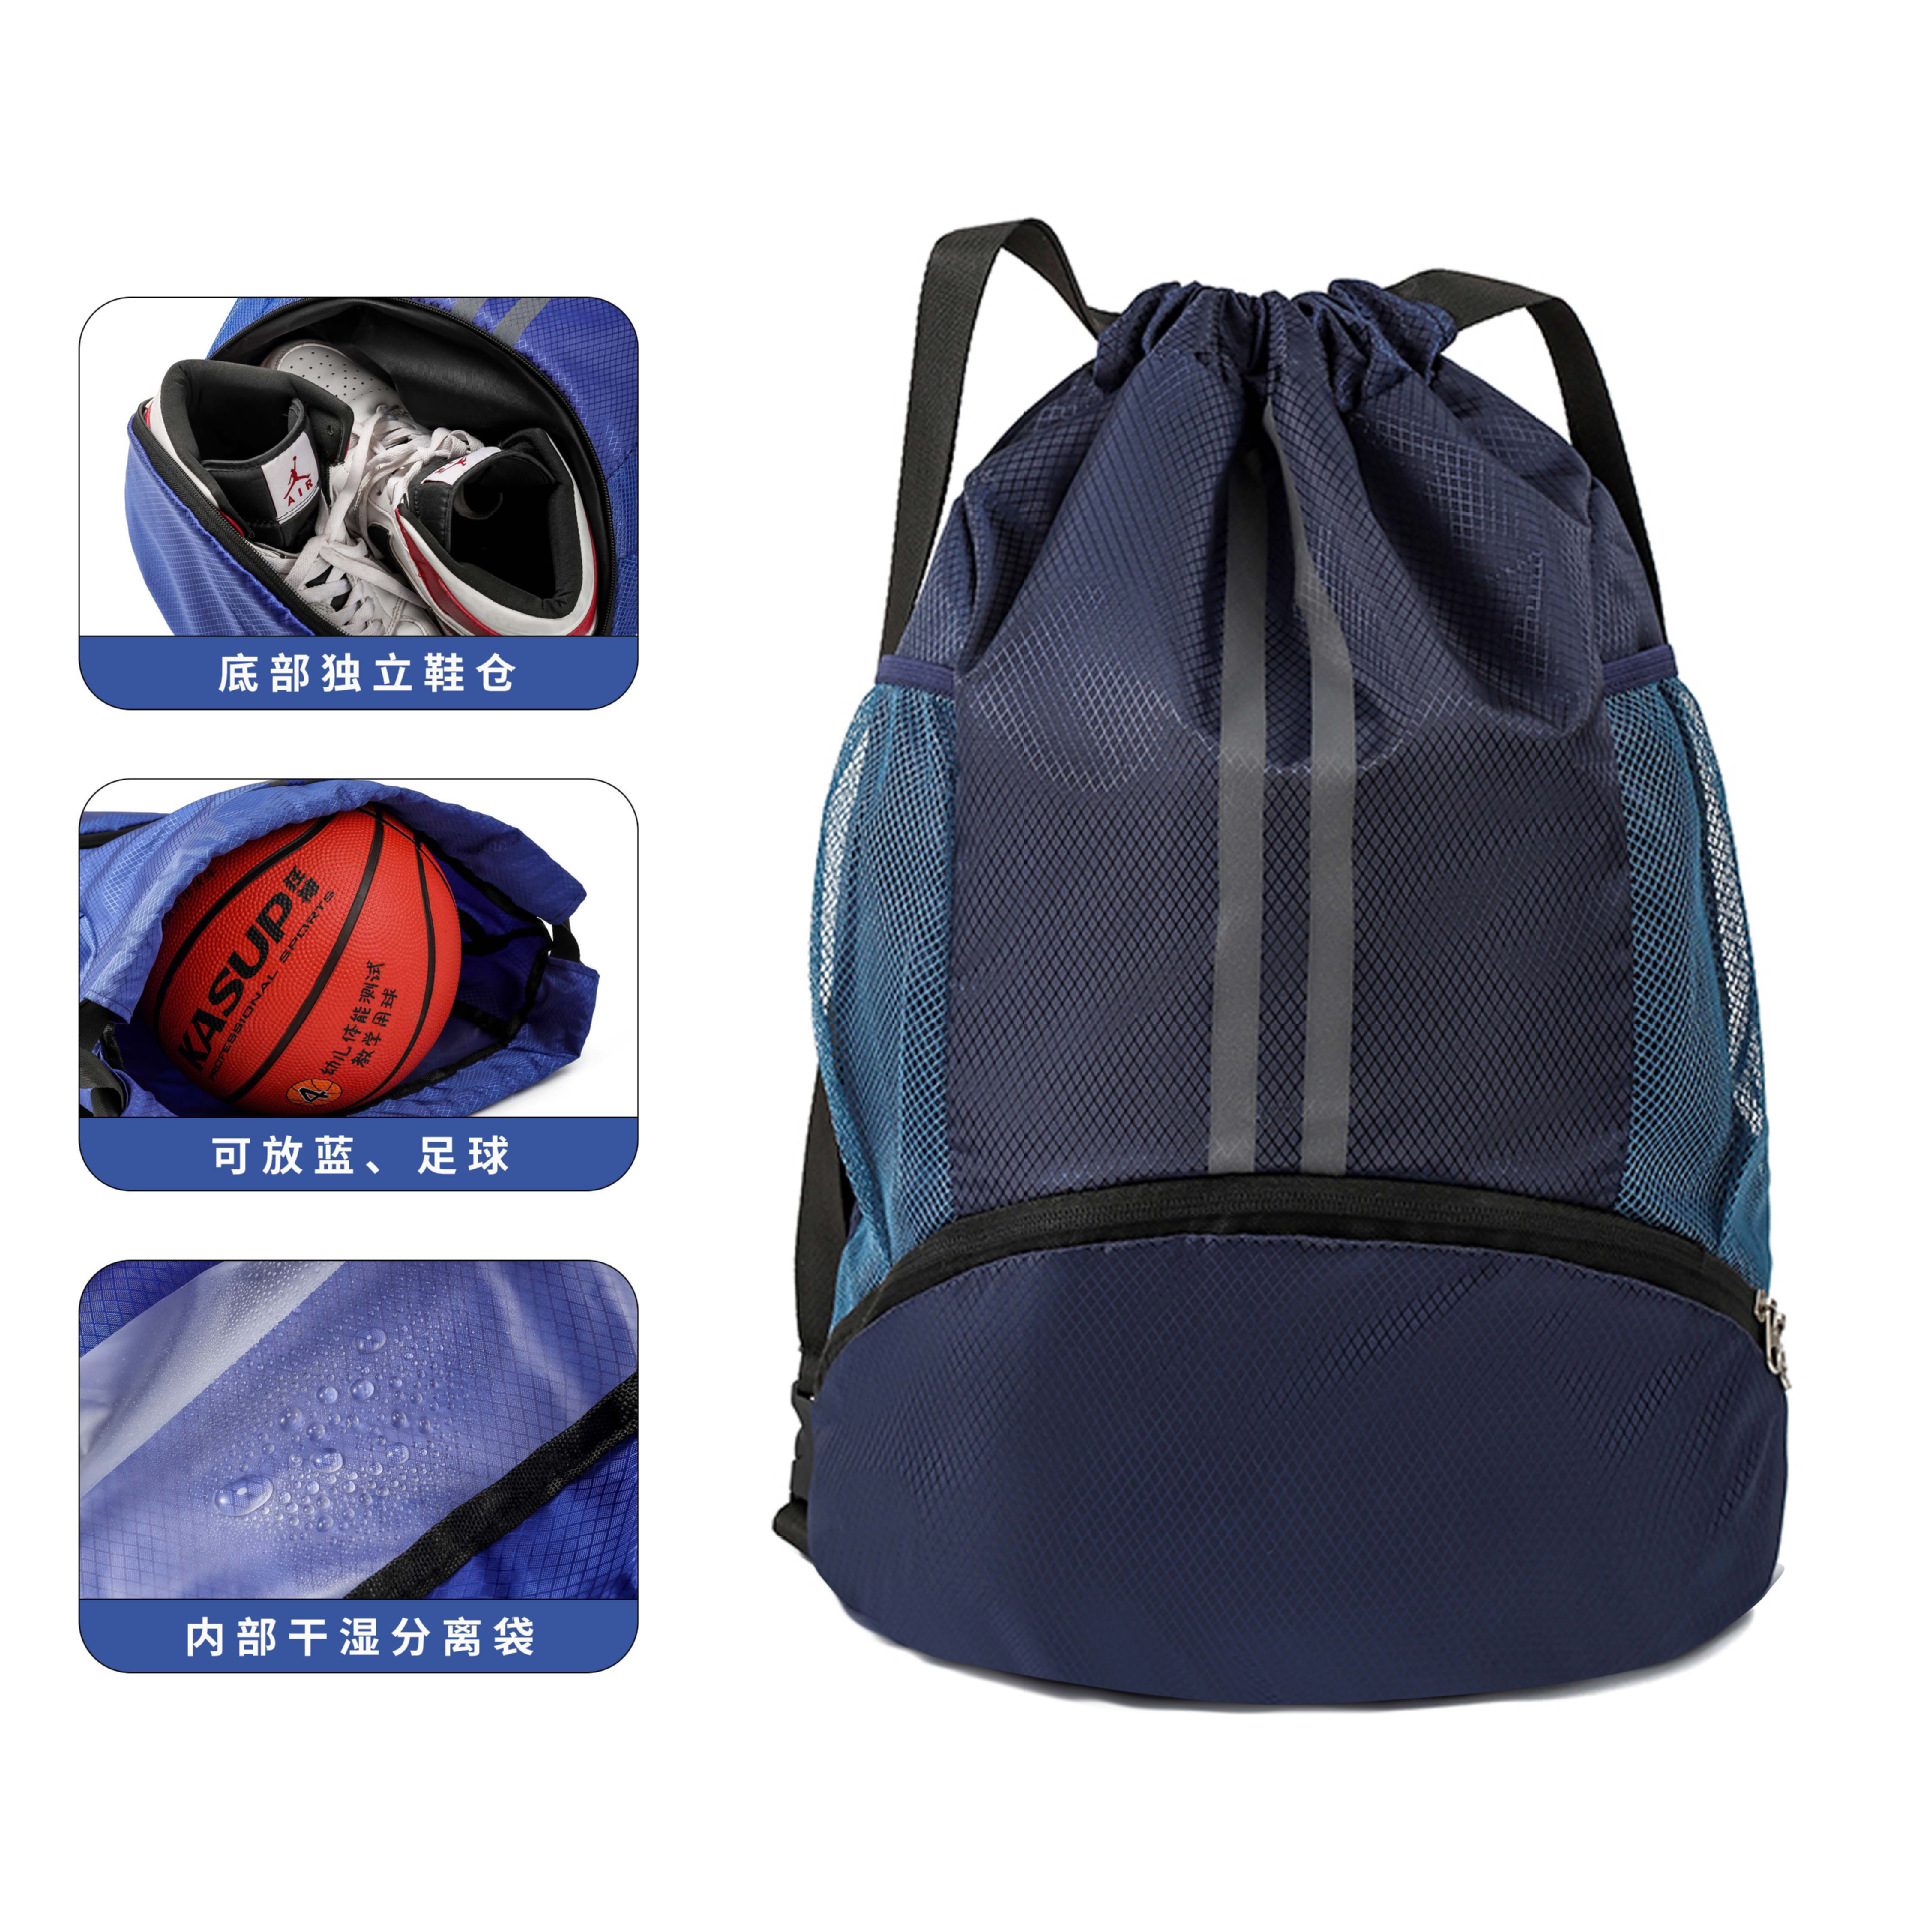 new basketball bag wet and dry separation package swimming bag with shoe warehouse football bag drawstring backpack travel storage bag